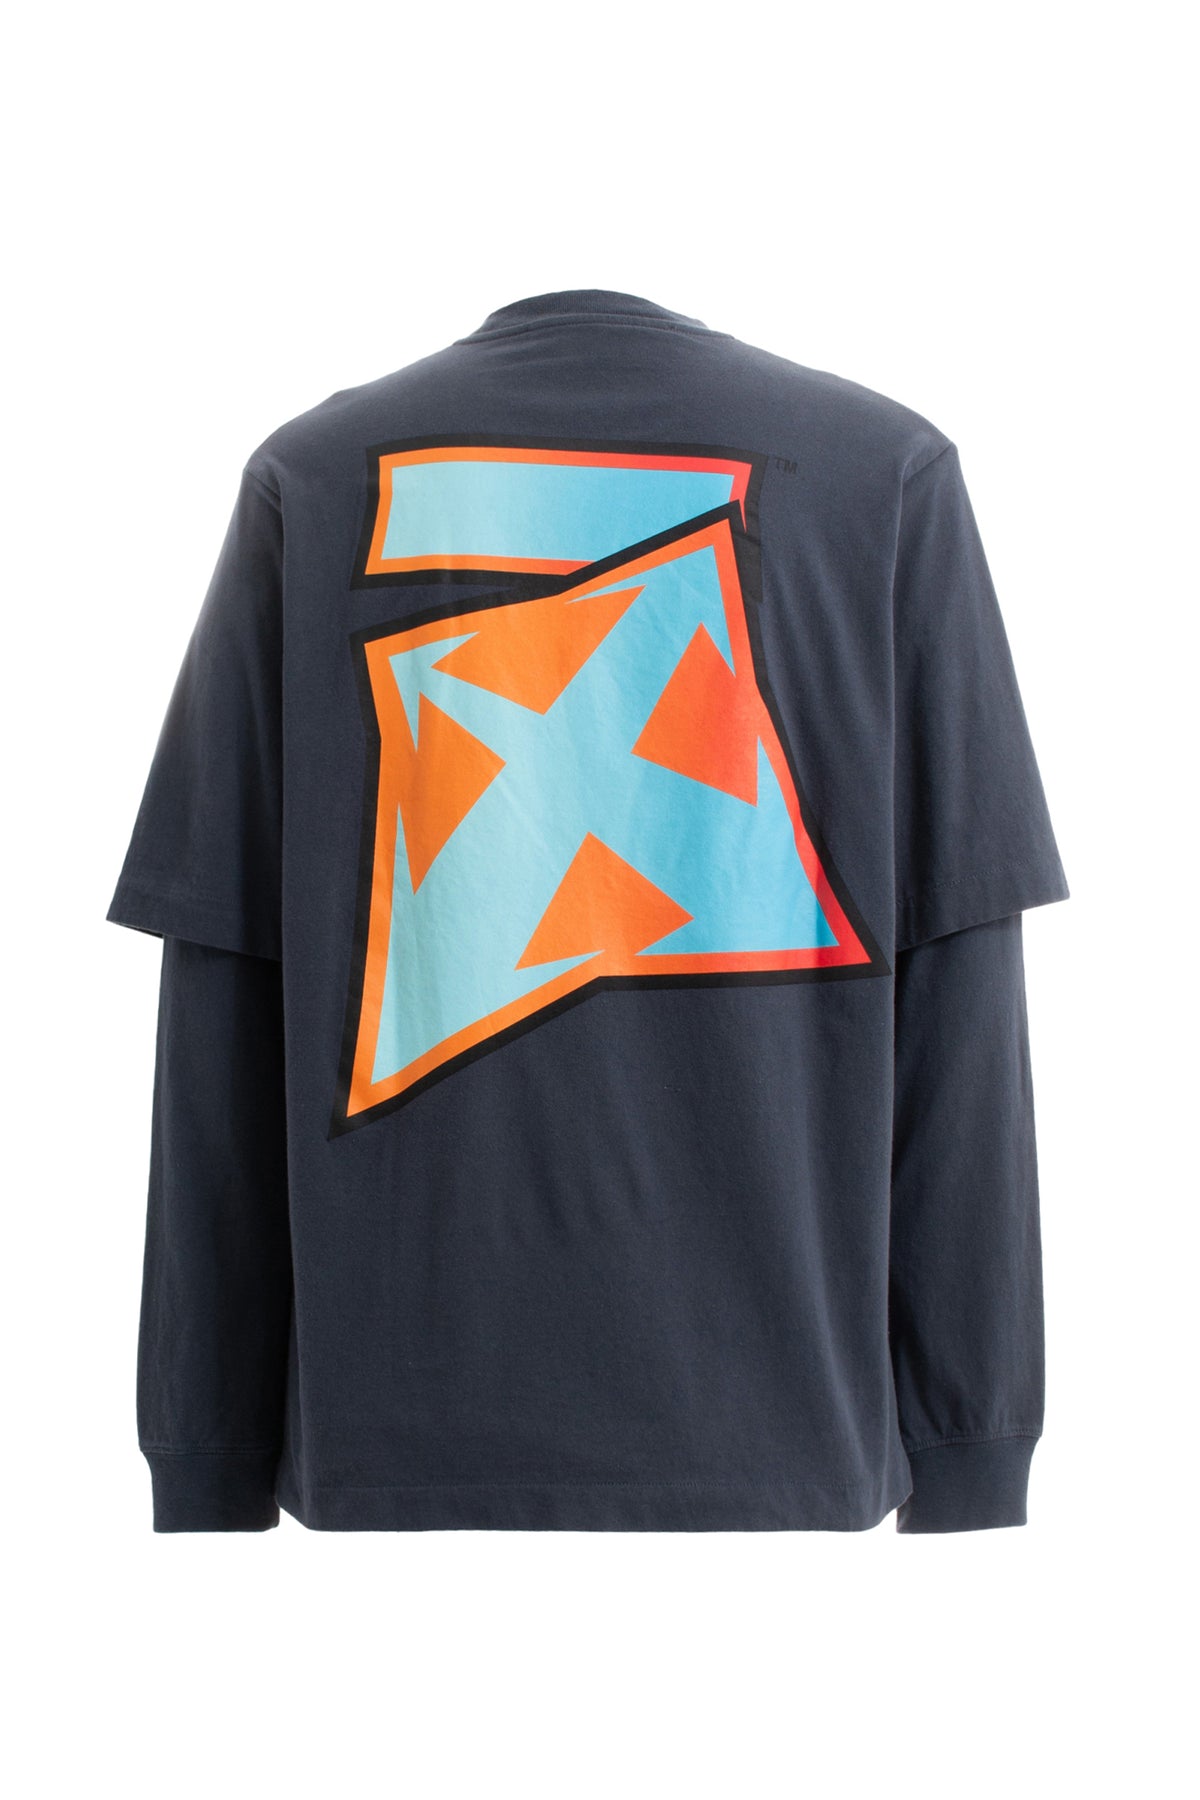 DEGRADE THUND DOUBLE L/S TEE / OUTERSPACE LIGHT